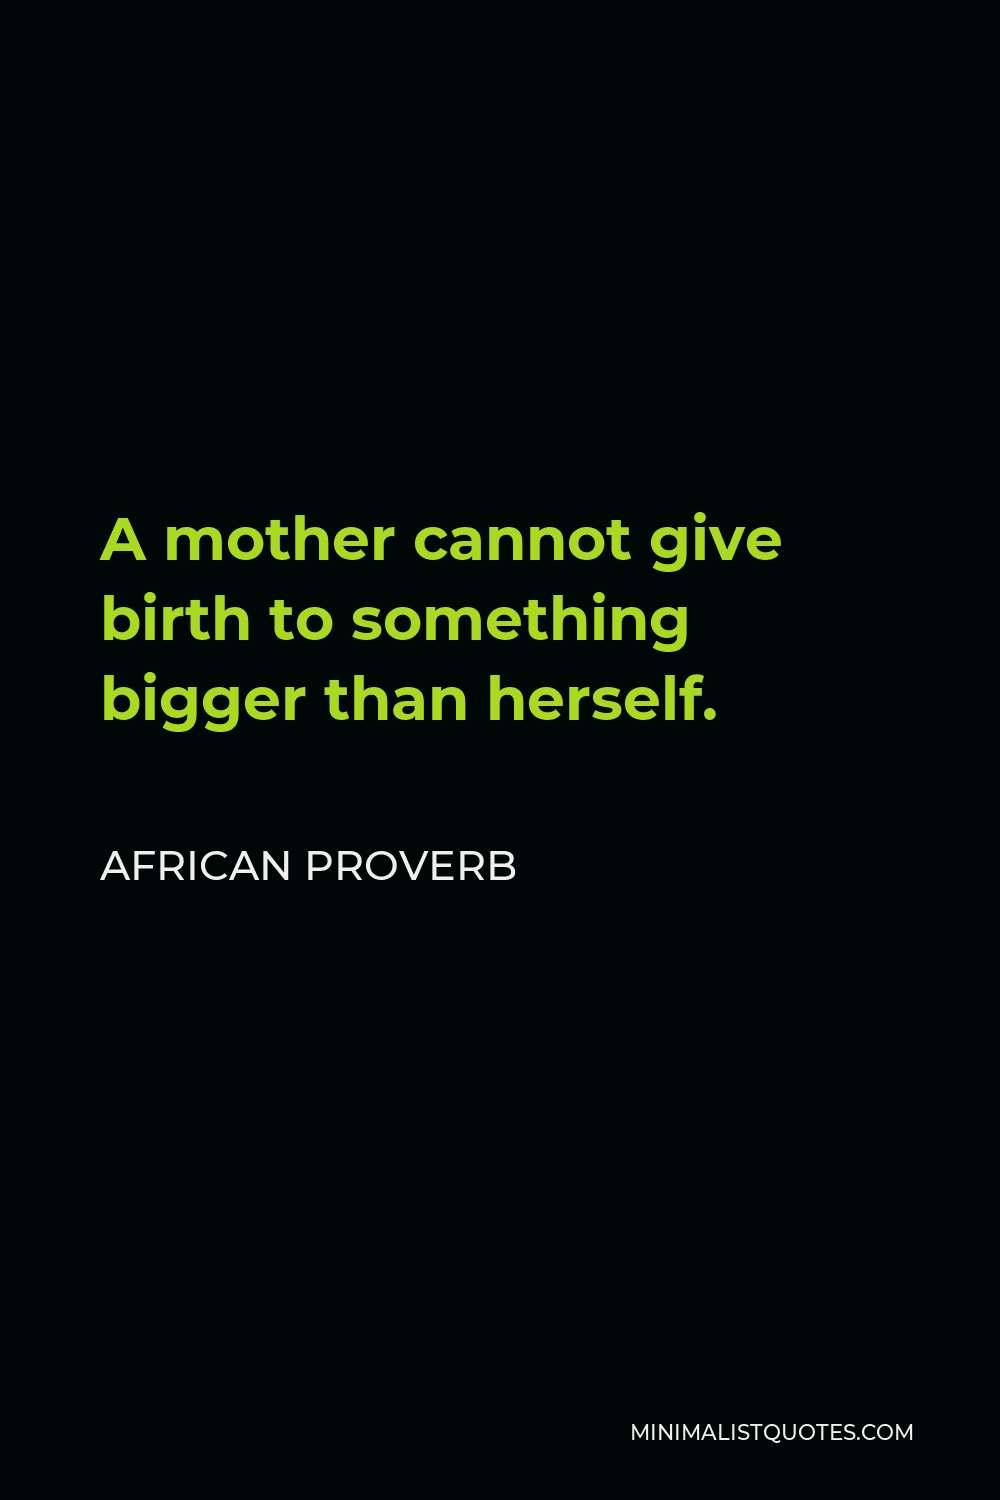 African Proverb Quote - A mother cannot give birth to something bigger than herself.